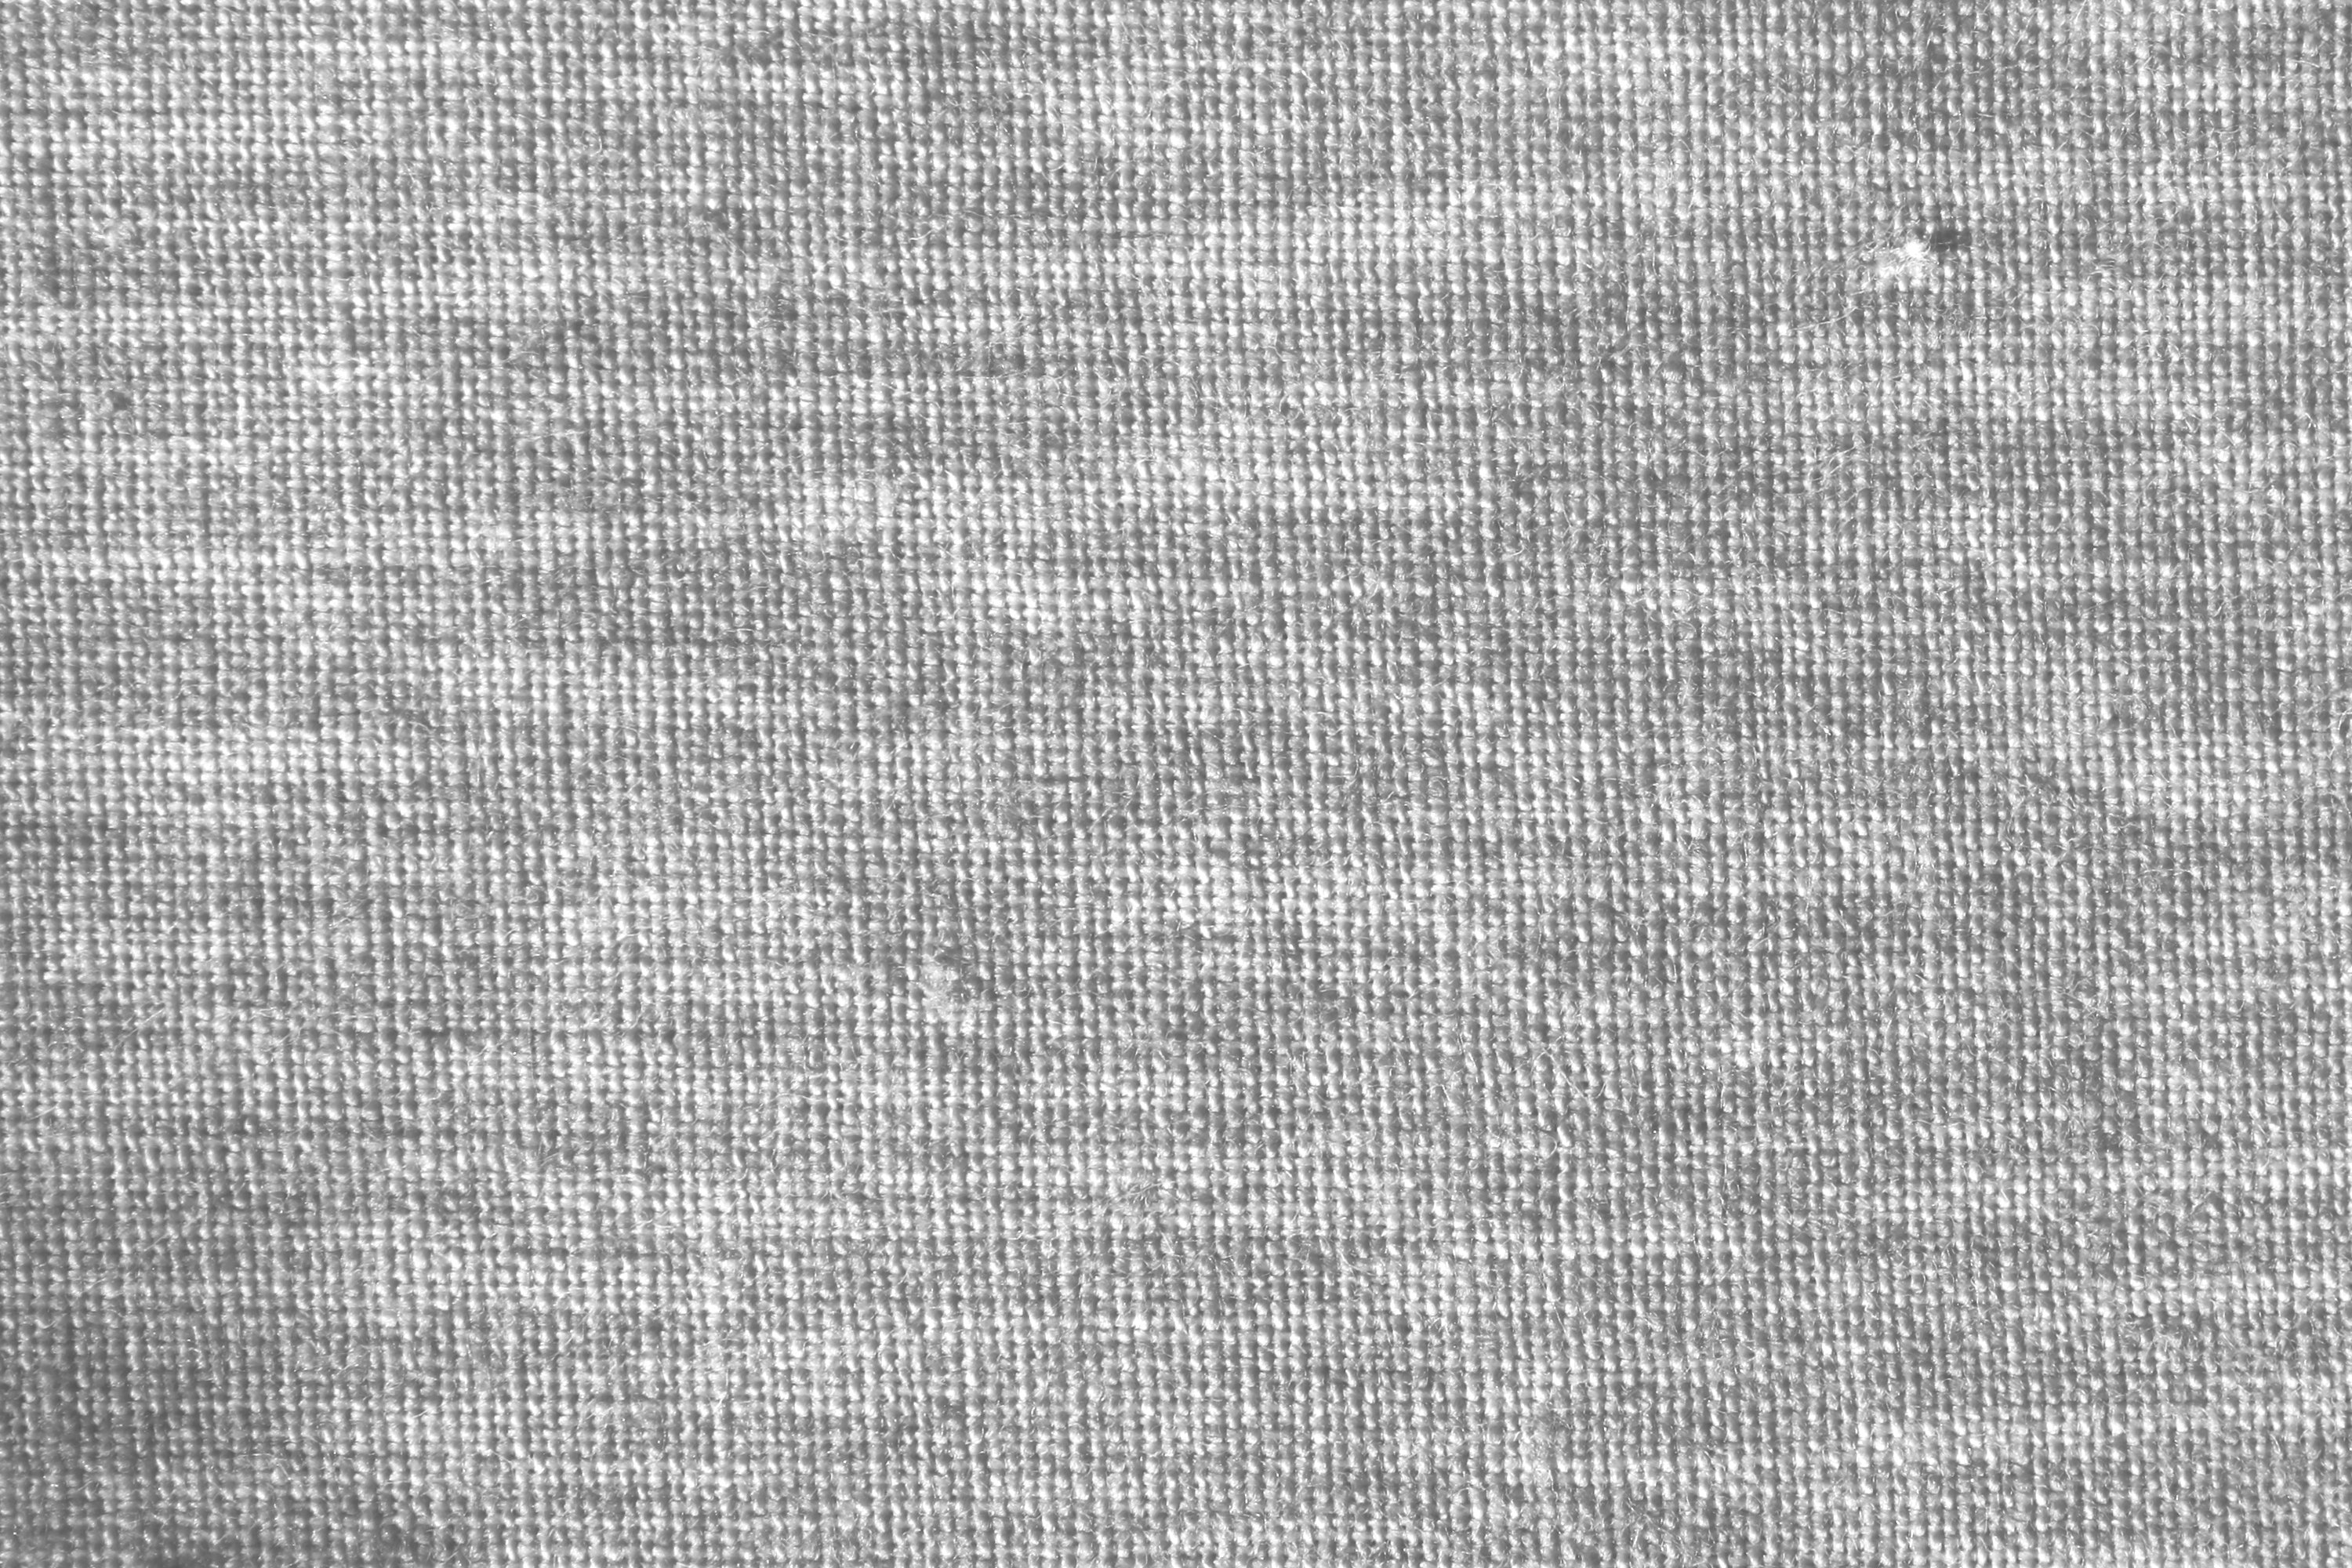 Close-up of gray fabric. Material for sewing clothes. Texture